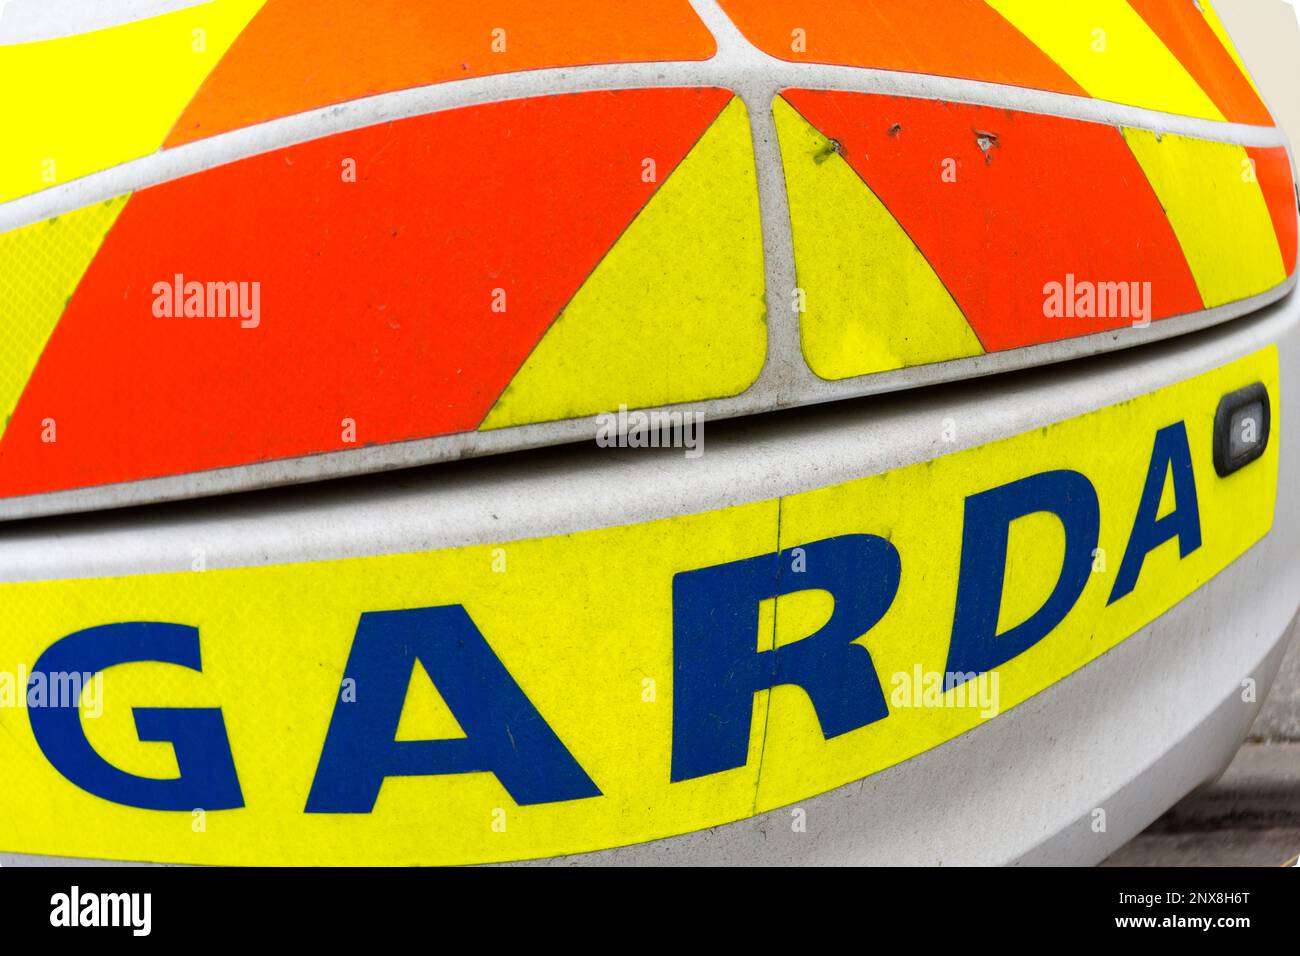 An Garda Síochána, meaning 'Guardians of the Peace of Ireland'. It is commonly referred to as “Garda”. An Irish police car close up. Stock Photo